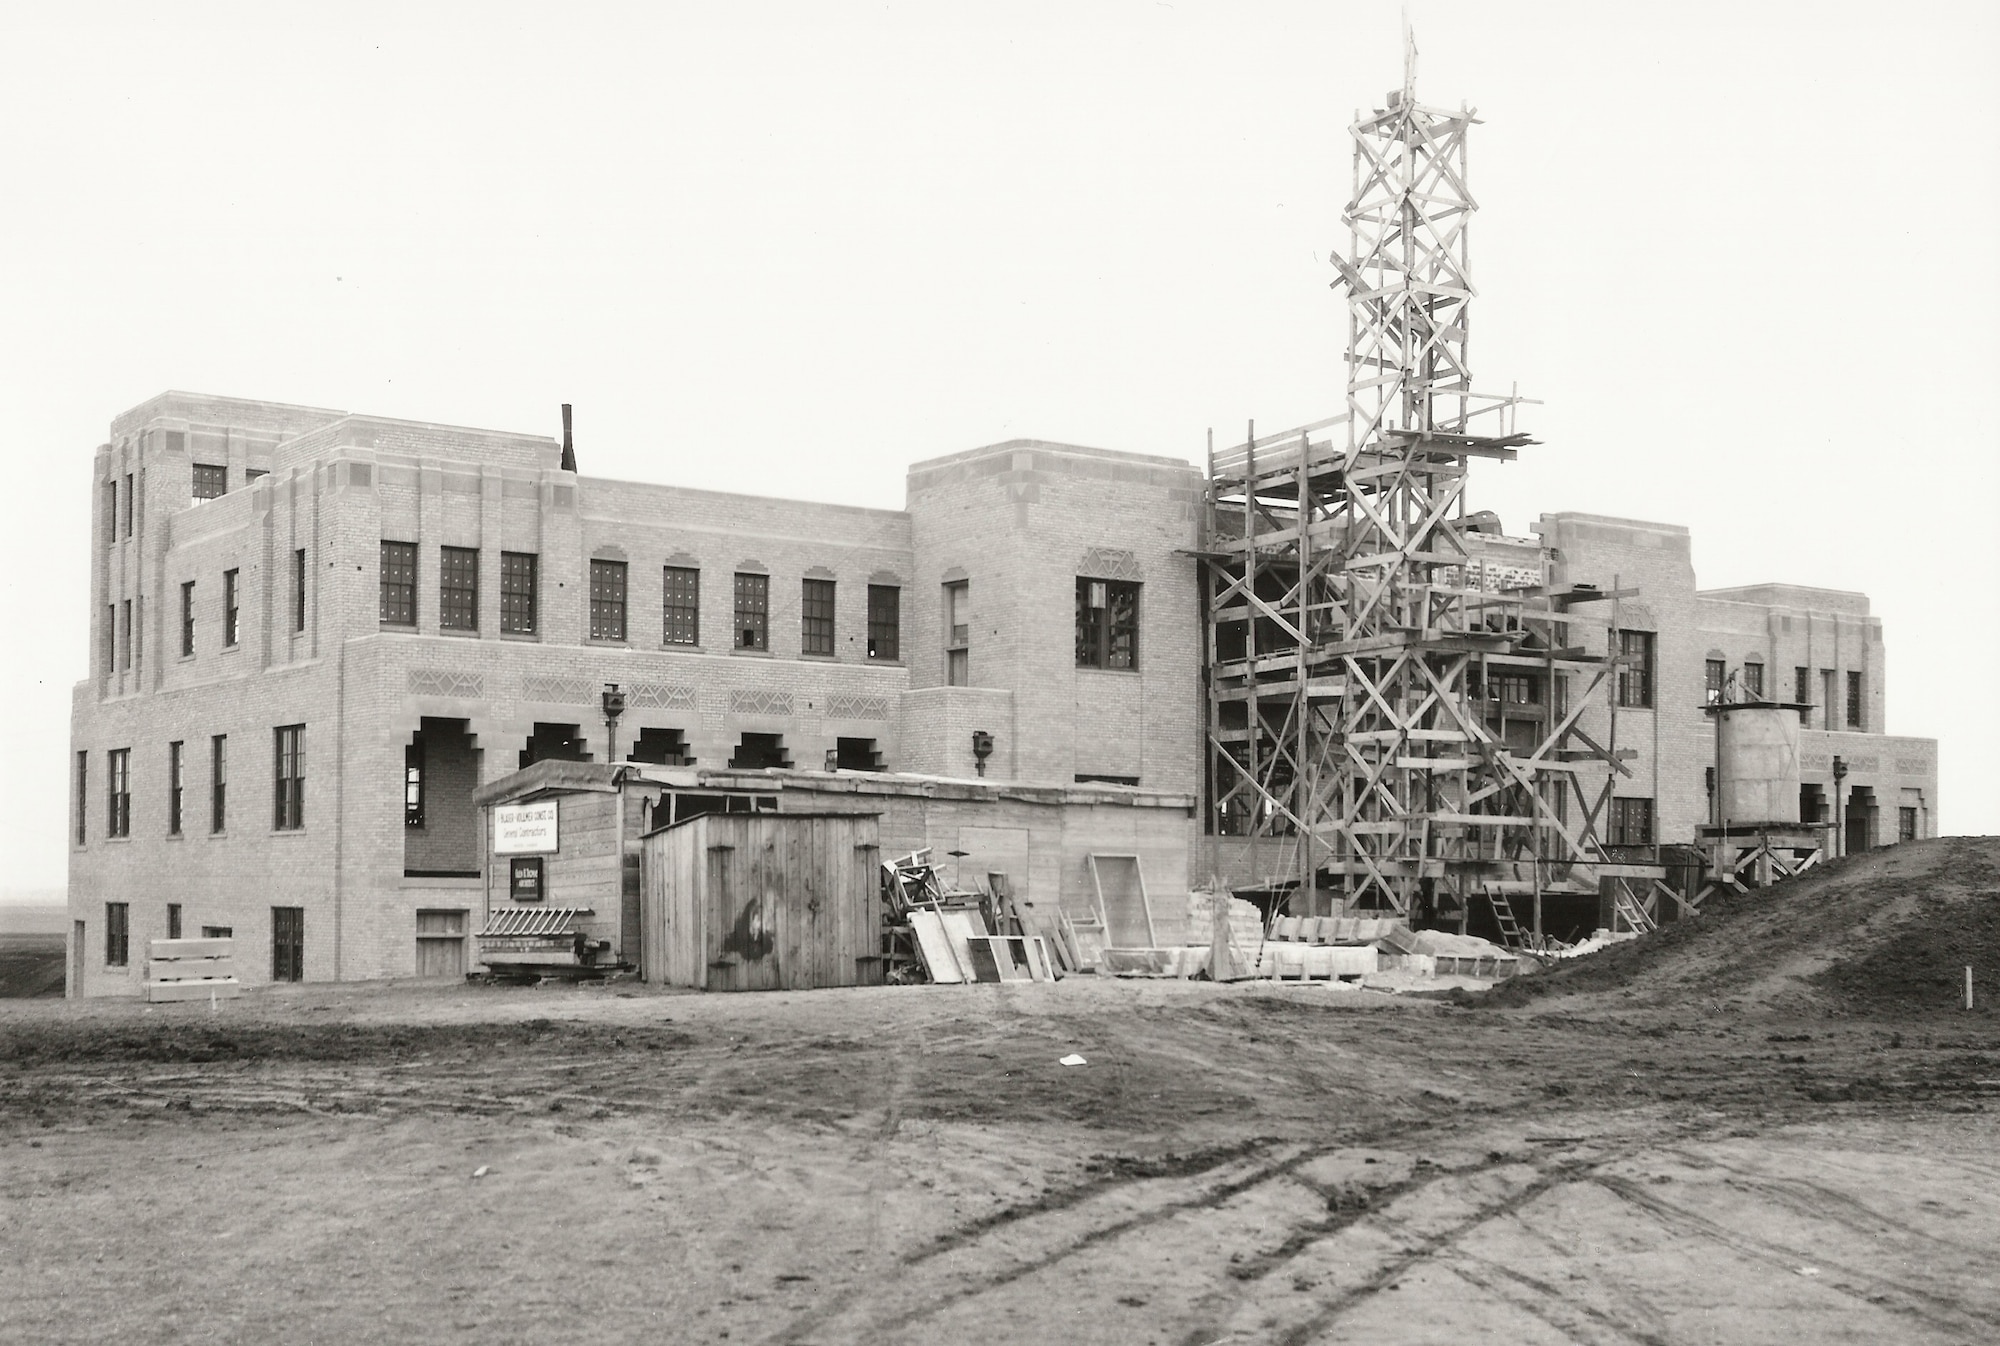 The Wichita Municipal Airport terminal building under construction ca. 1930.  When the USAF arrived at McConnell in 1951, the structure was designated as Building One and served as wing headquarters. The old airport building now houses the Kansas Aviation Museum. (Courtesy photo)